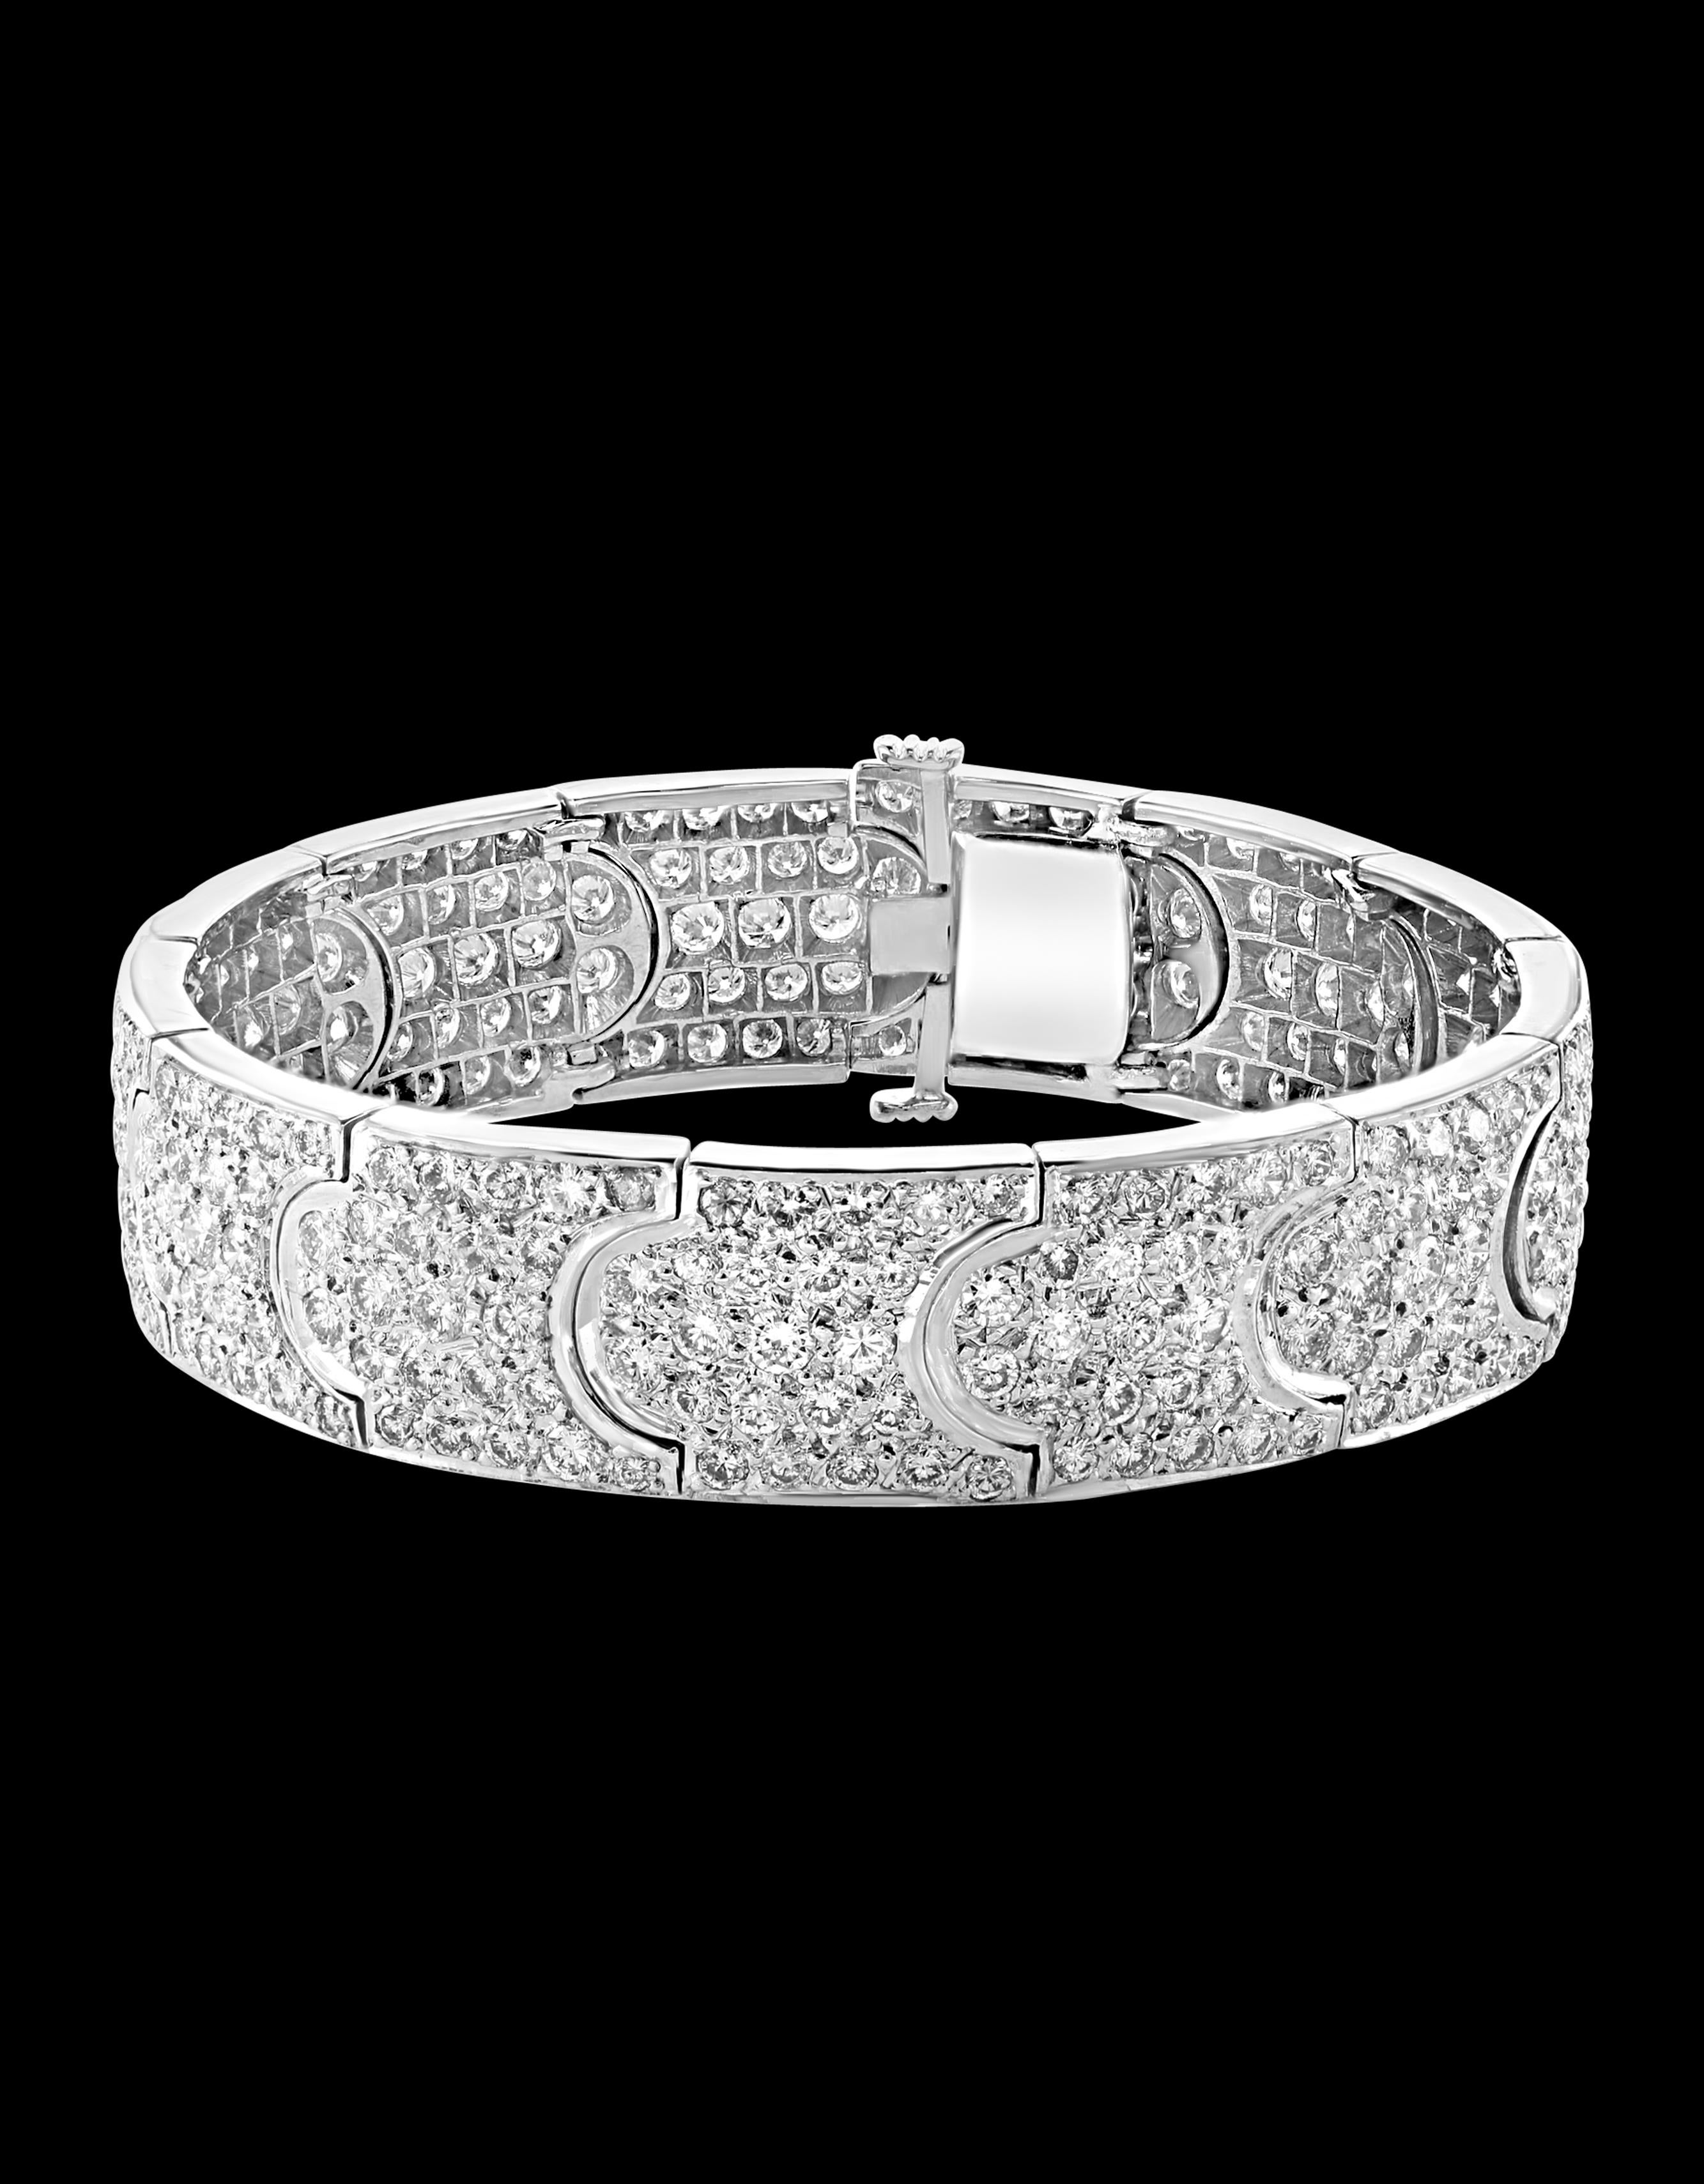 15 Carat Diamonds 18 Karat White Gold Wide Cocktail Bangle/Bracelet  Estate
It features a bangle style  Bracelet crafted from an 18k white gold and embedded with  15 Carats of  Round diamonds . The  Wide pattern can be stacked with similar style